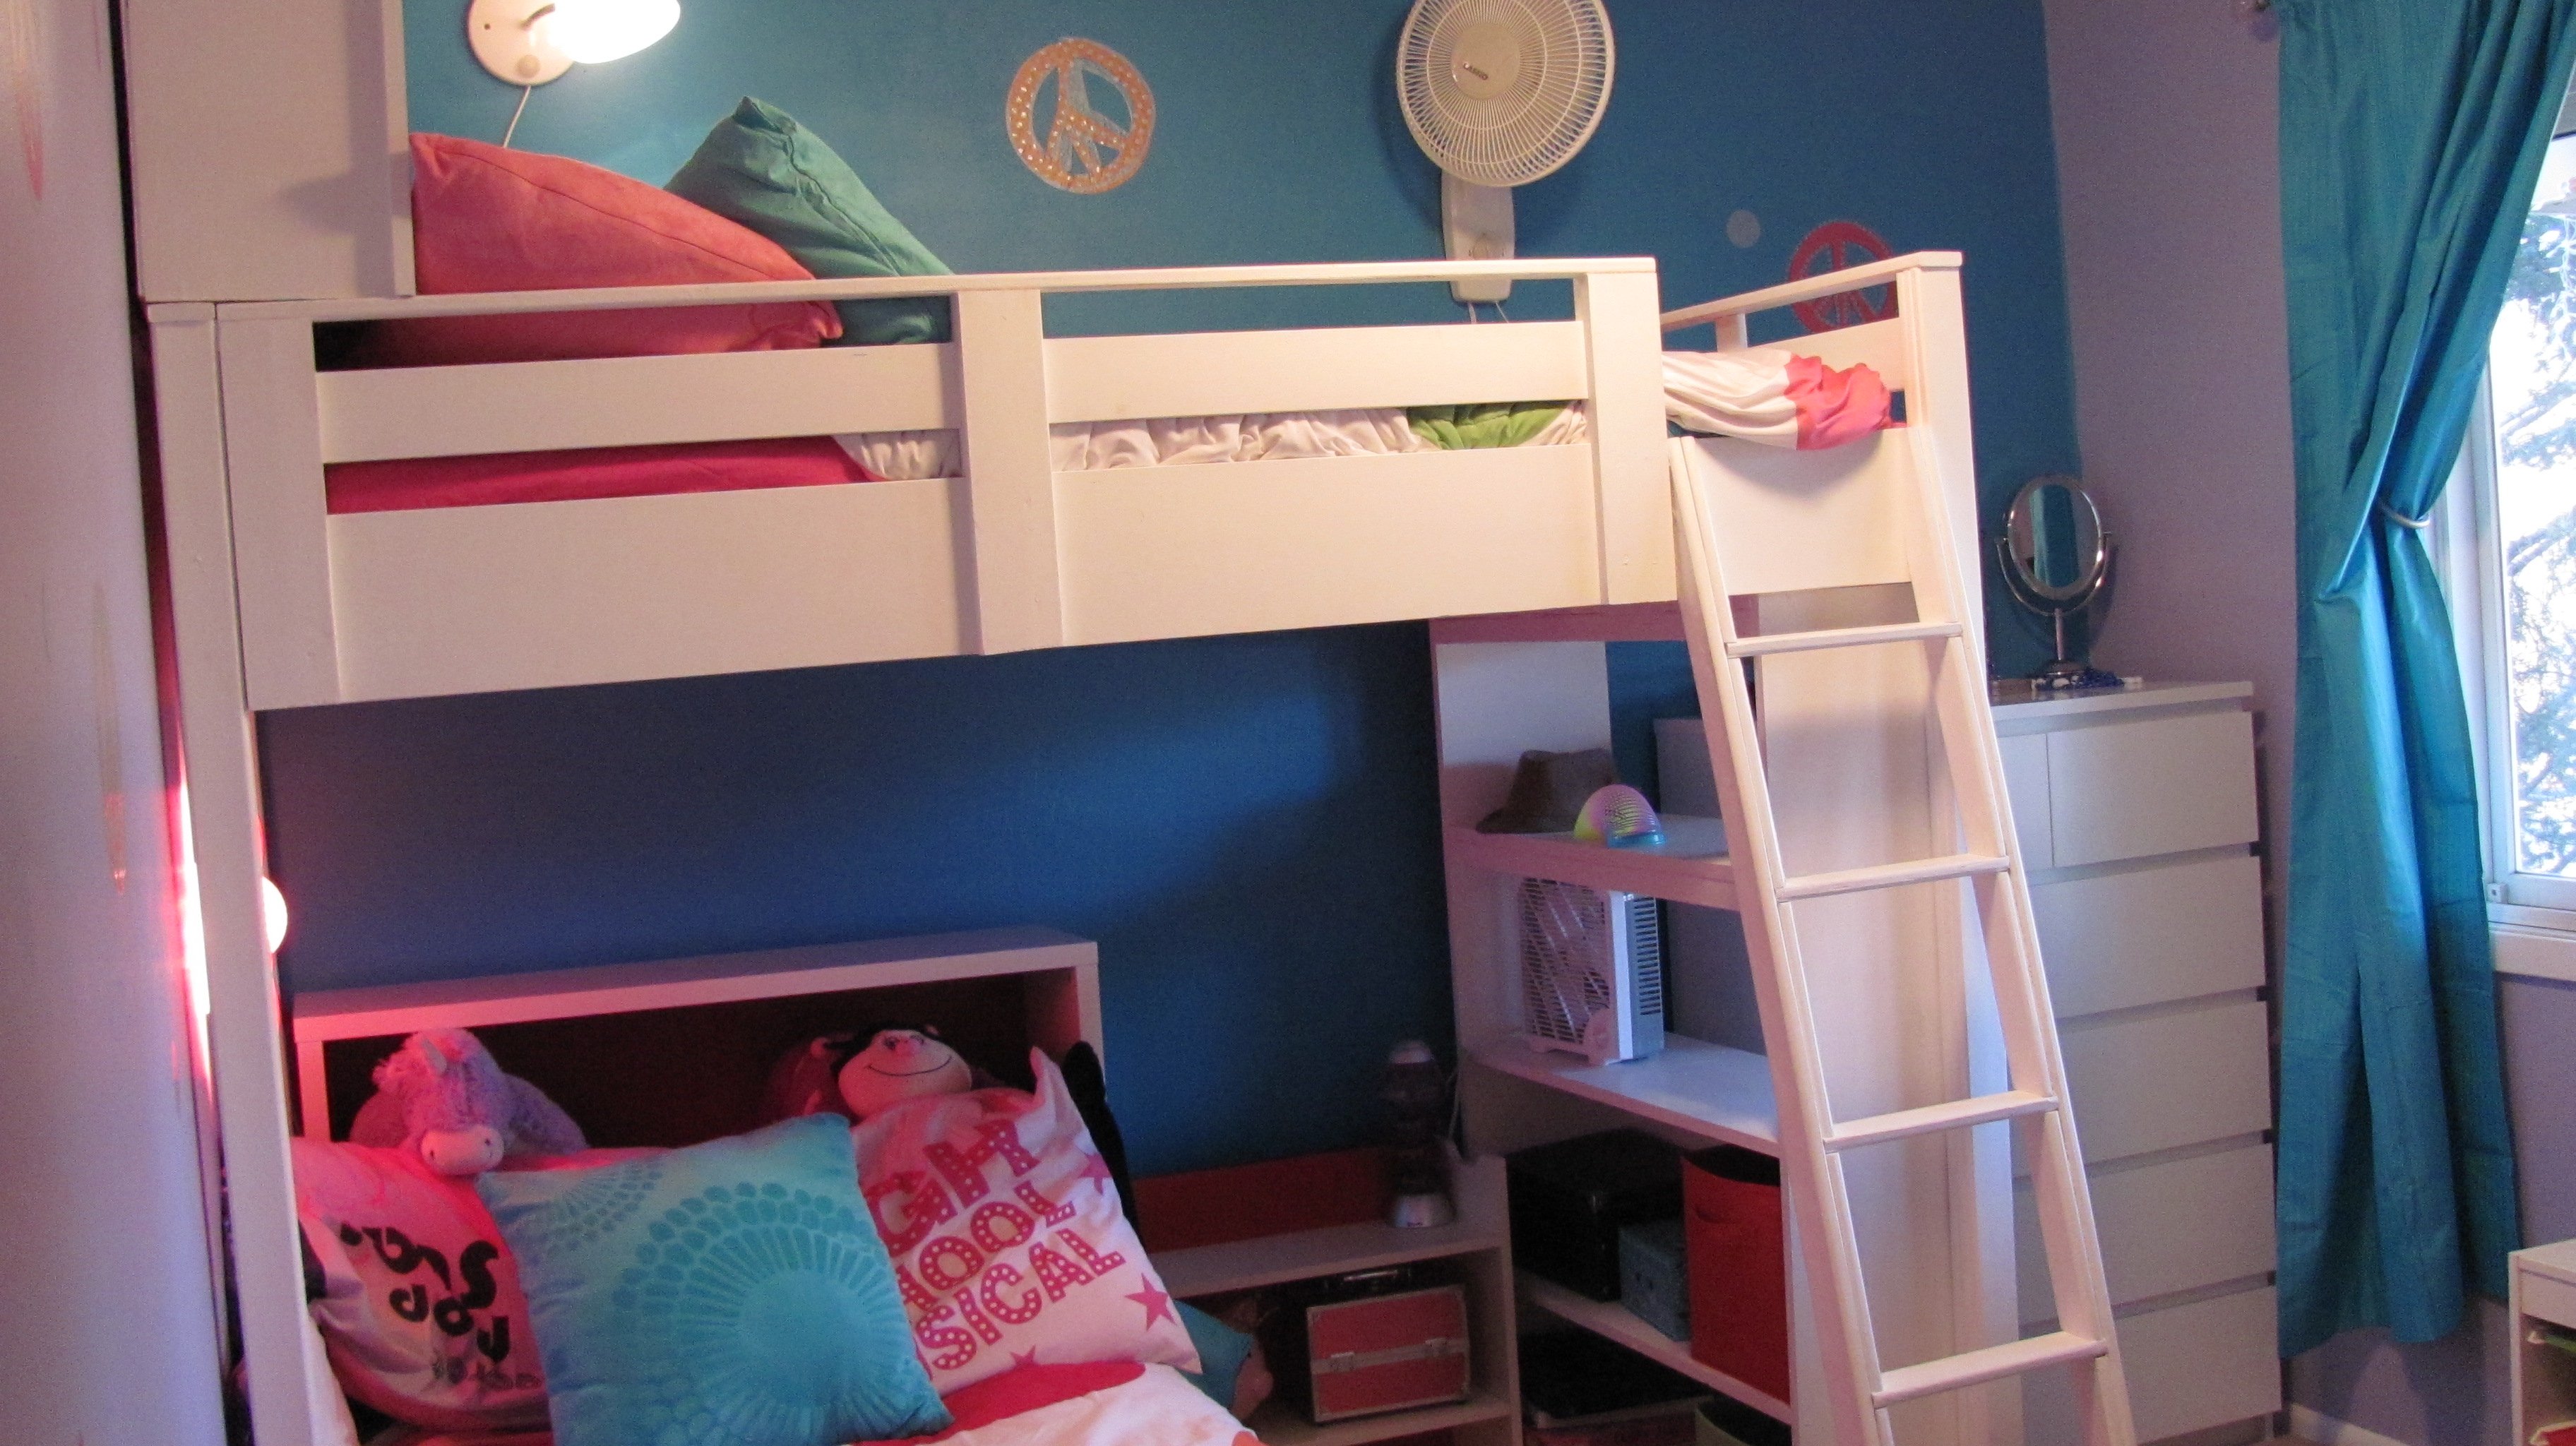 Loft Bed W Bookcase And Headboard, Bunk Beds With Bookshelf Headboards